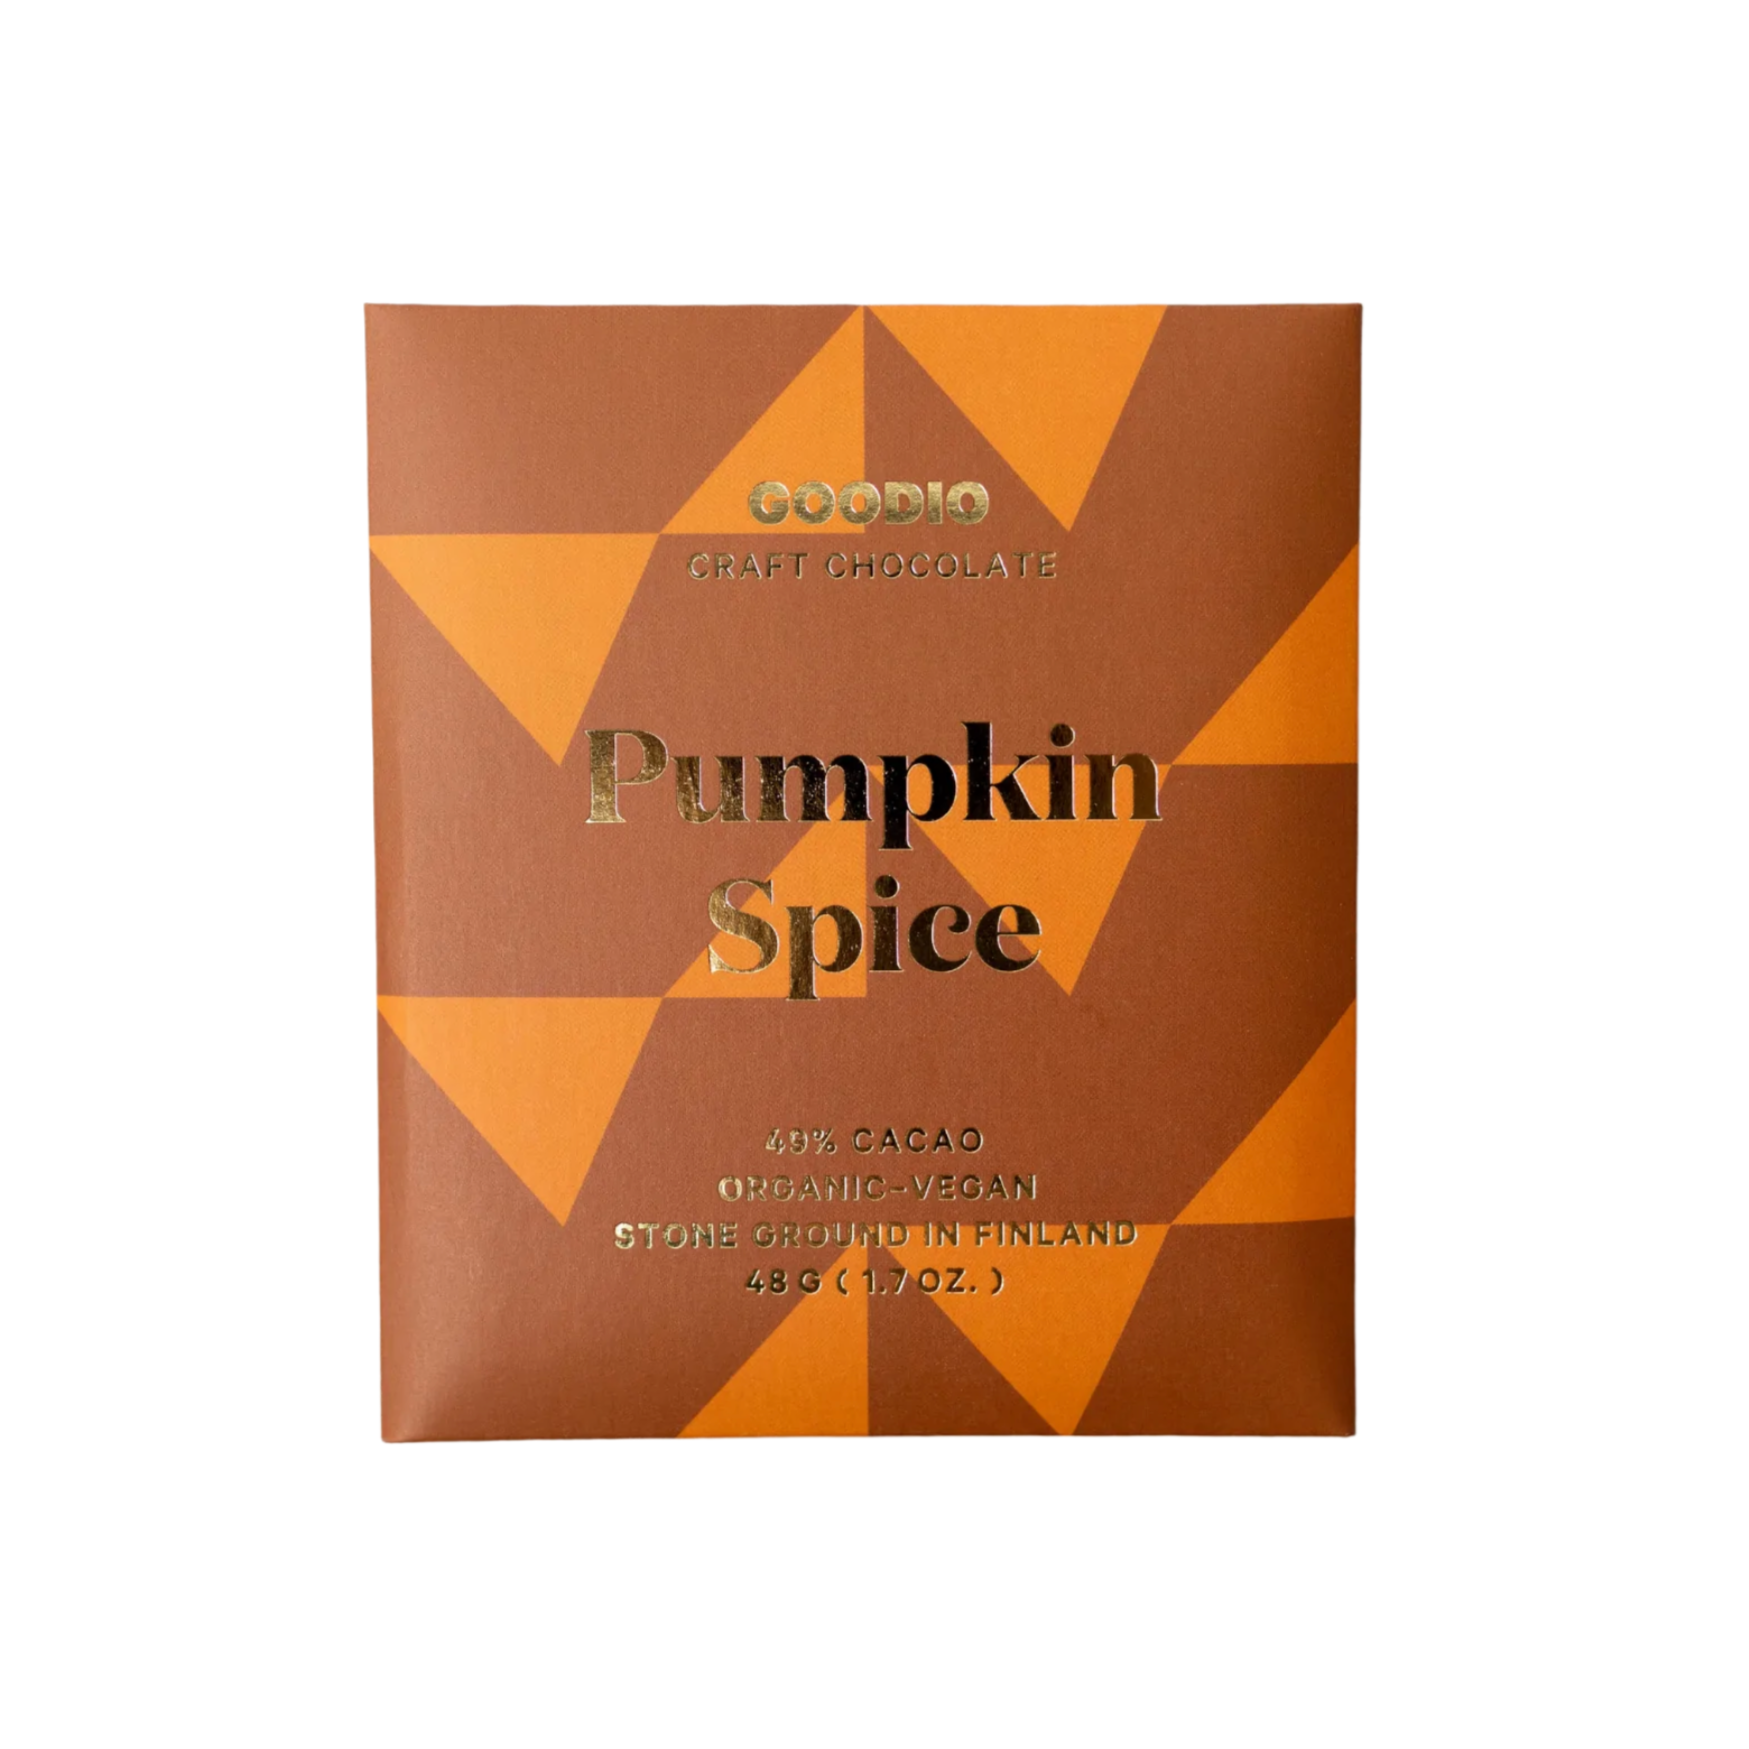 A square chocolate bar packaged in brown and orange geometric designed paper. Gold leaf writing on packaging reads, &quot;Goodio Craft Chocolate Pumpkin Spice 49% Cacao Organic - Vegan Stone Ground in Finland 48g (1.7 oz.)&quot;.